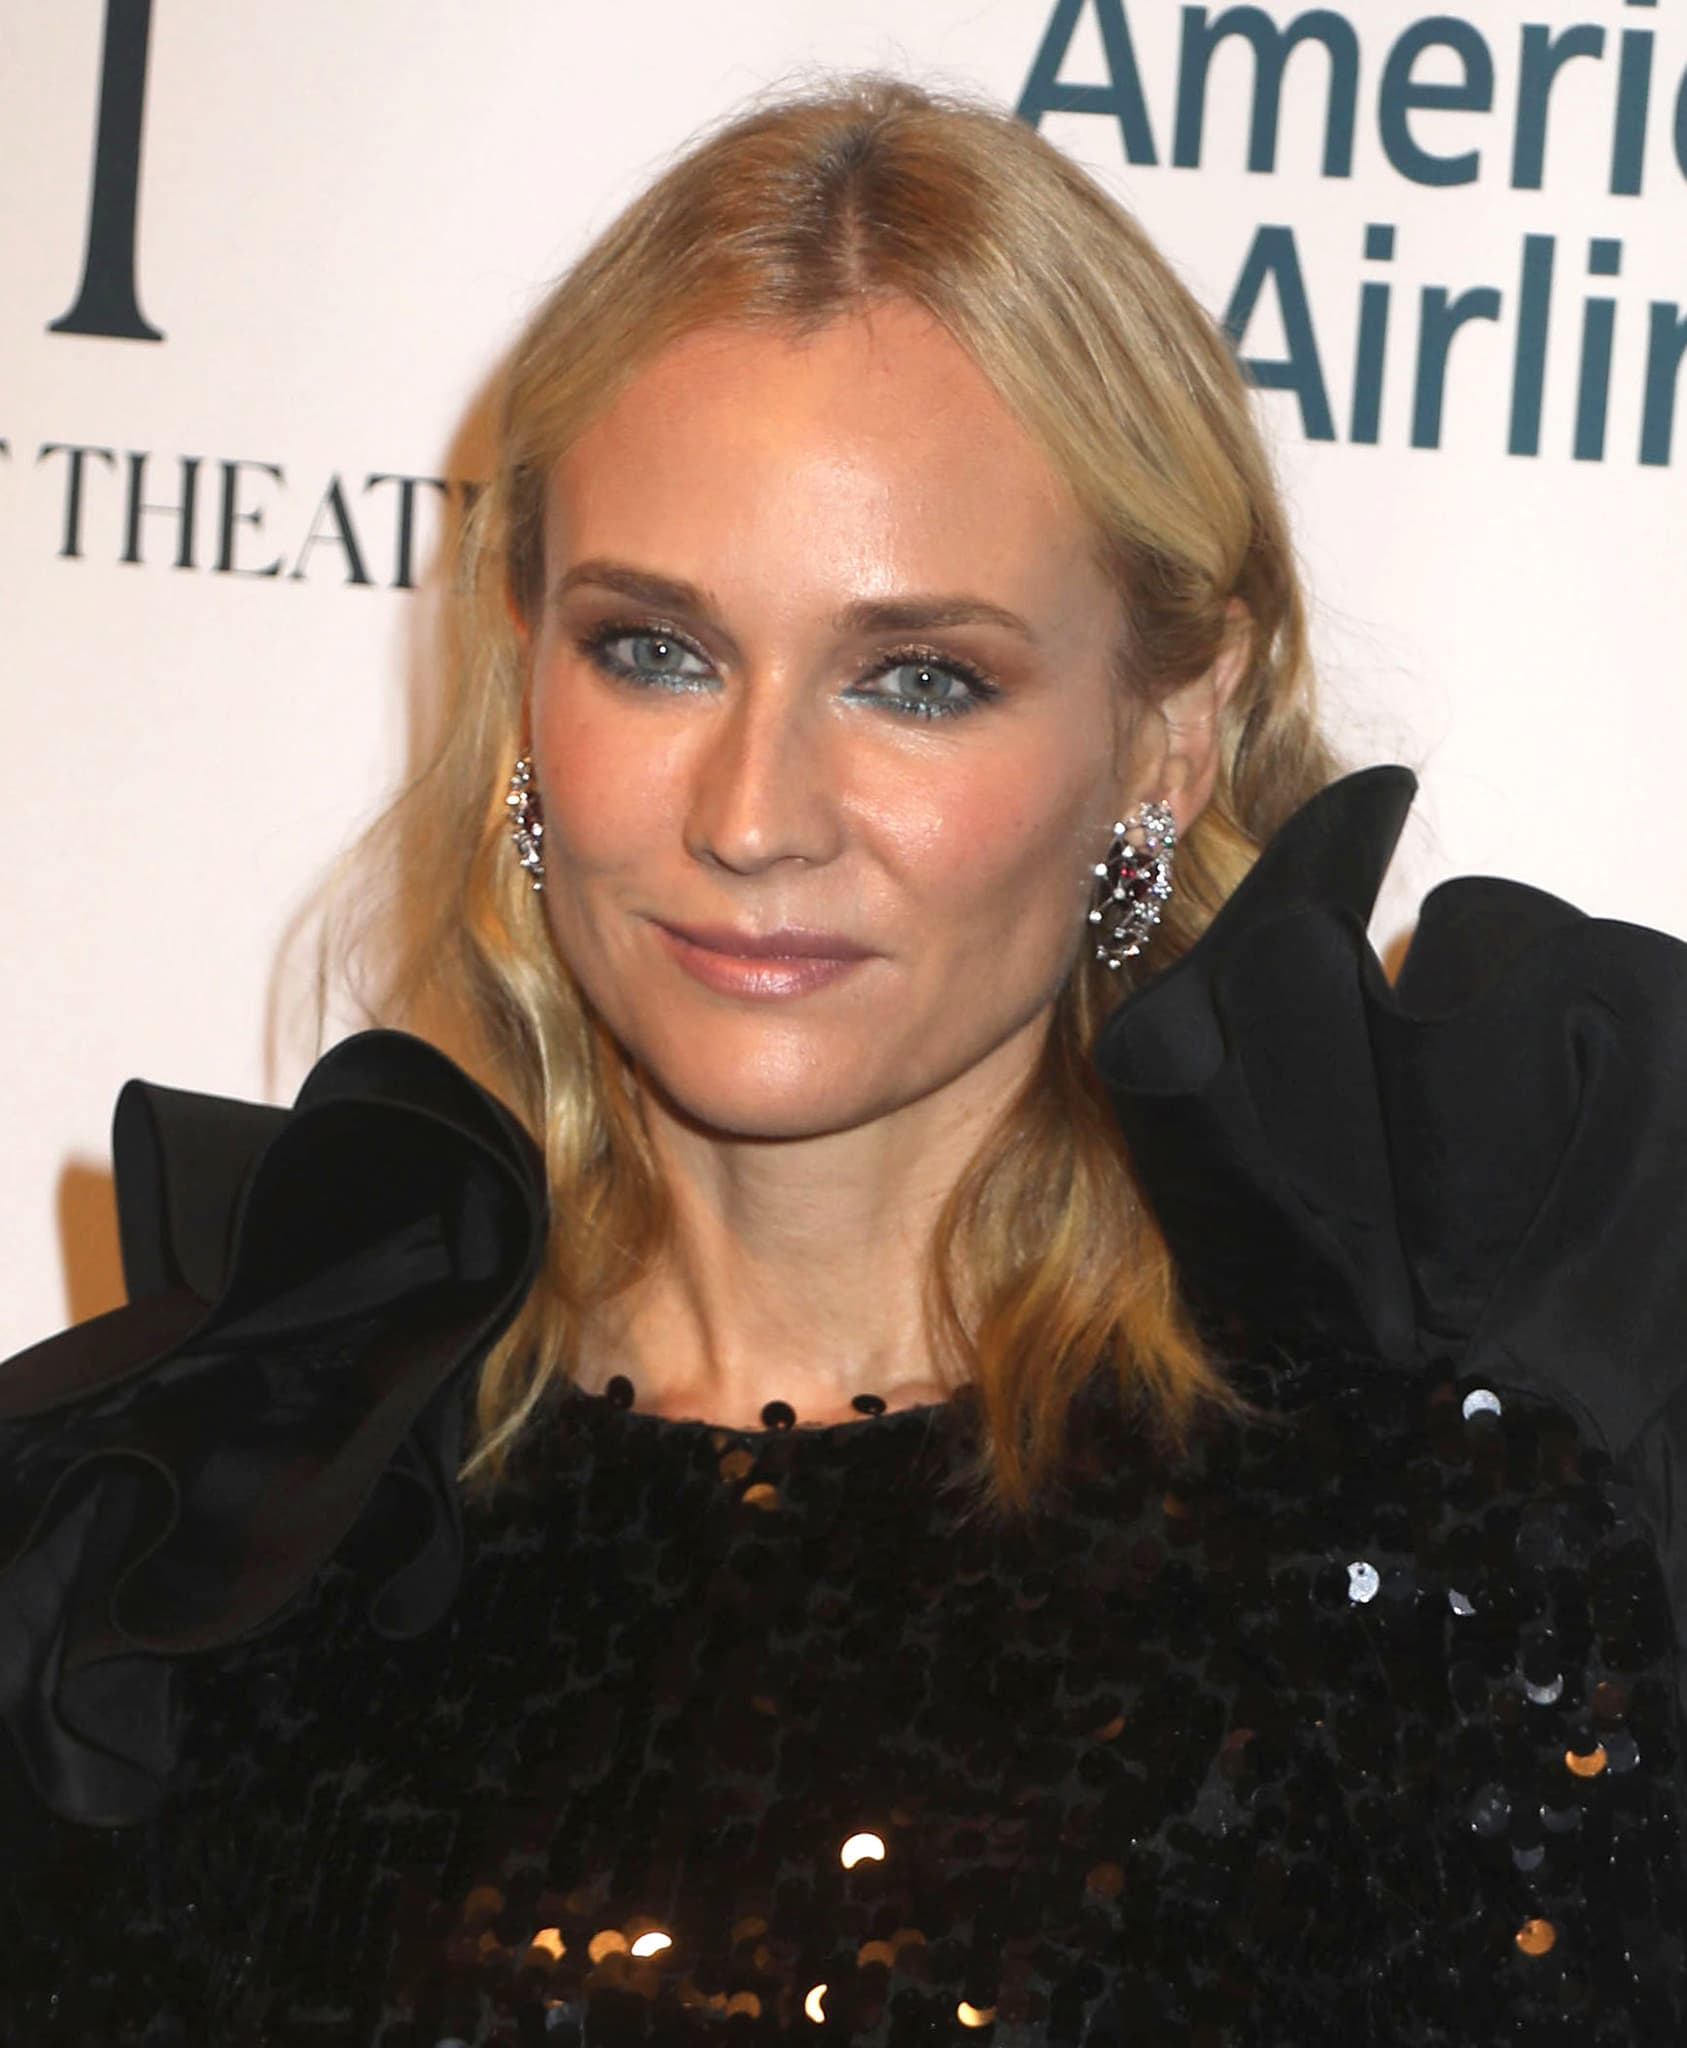 Diane Kruger glams up with bronze eyeshadow, teal bottom eyeliner, nude lipstick, and soft waves hairstyle